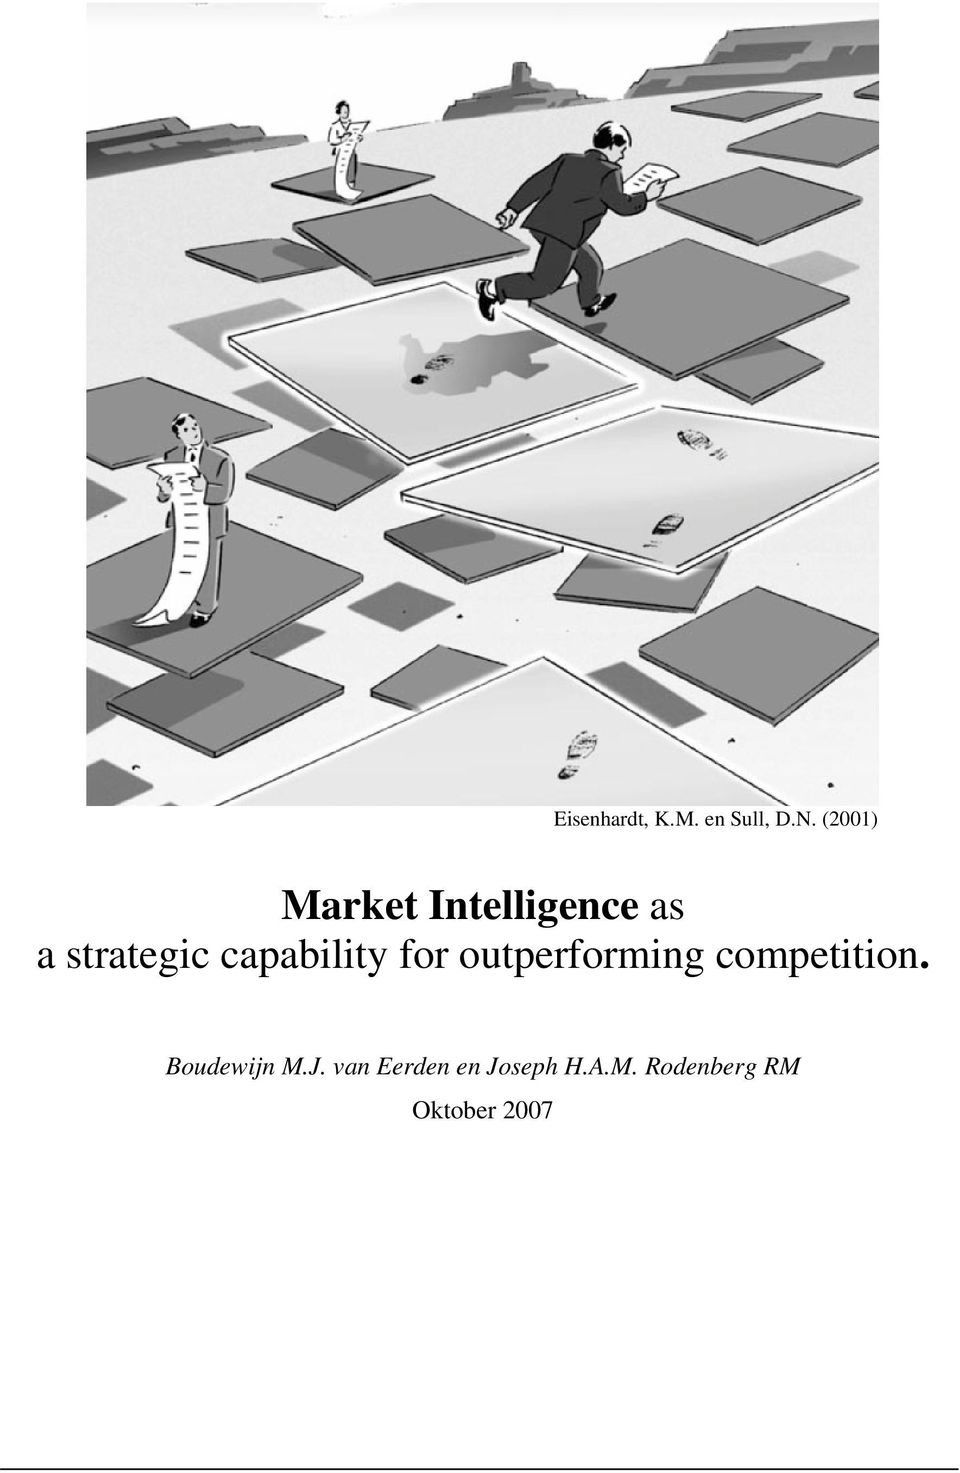 capability for outperforming competition.